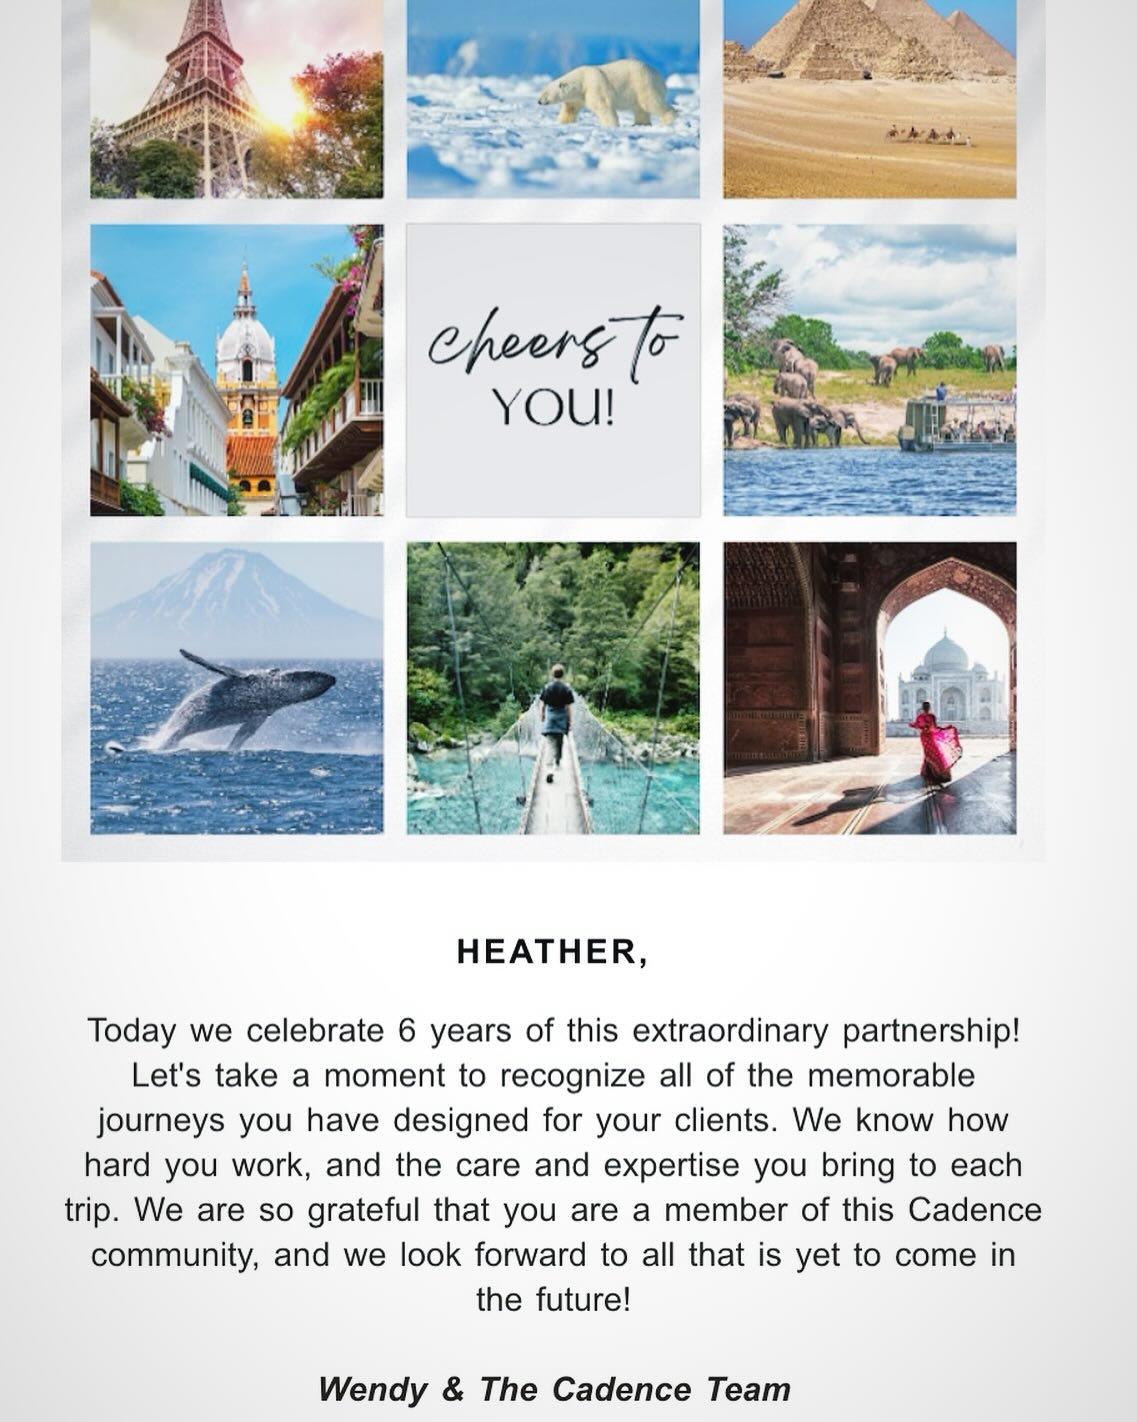 Today marks 6 years since I joined Cadence in La Jolla as my host travel agency. Thank you to Wendy and the Cadence team for this lovely message and for the leadership, support, encouragement (zooms through the pandemic), innovative tools, and creati